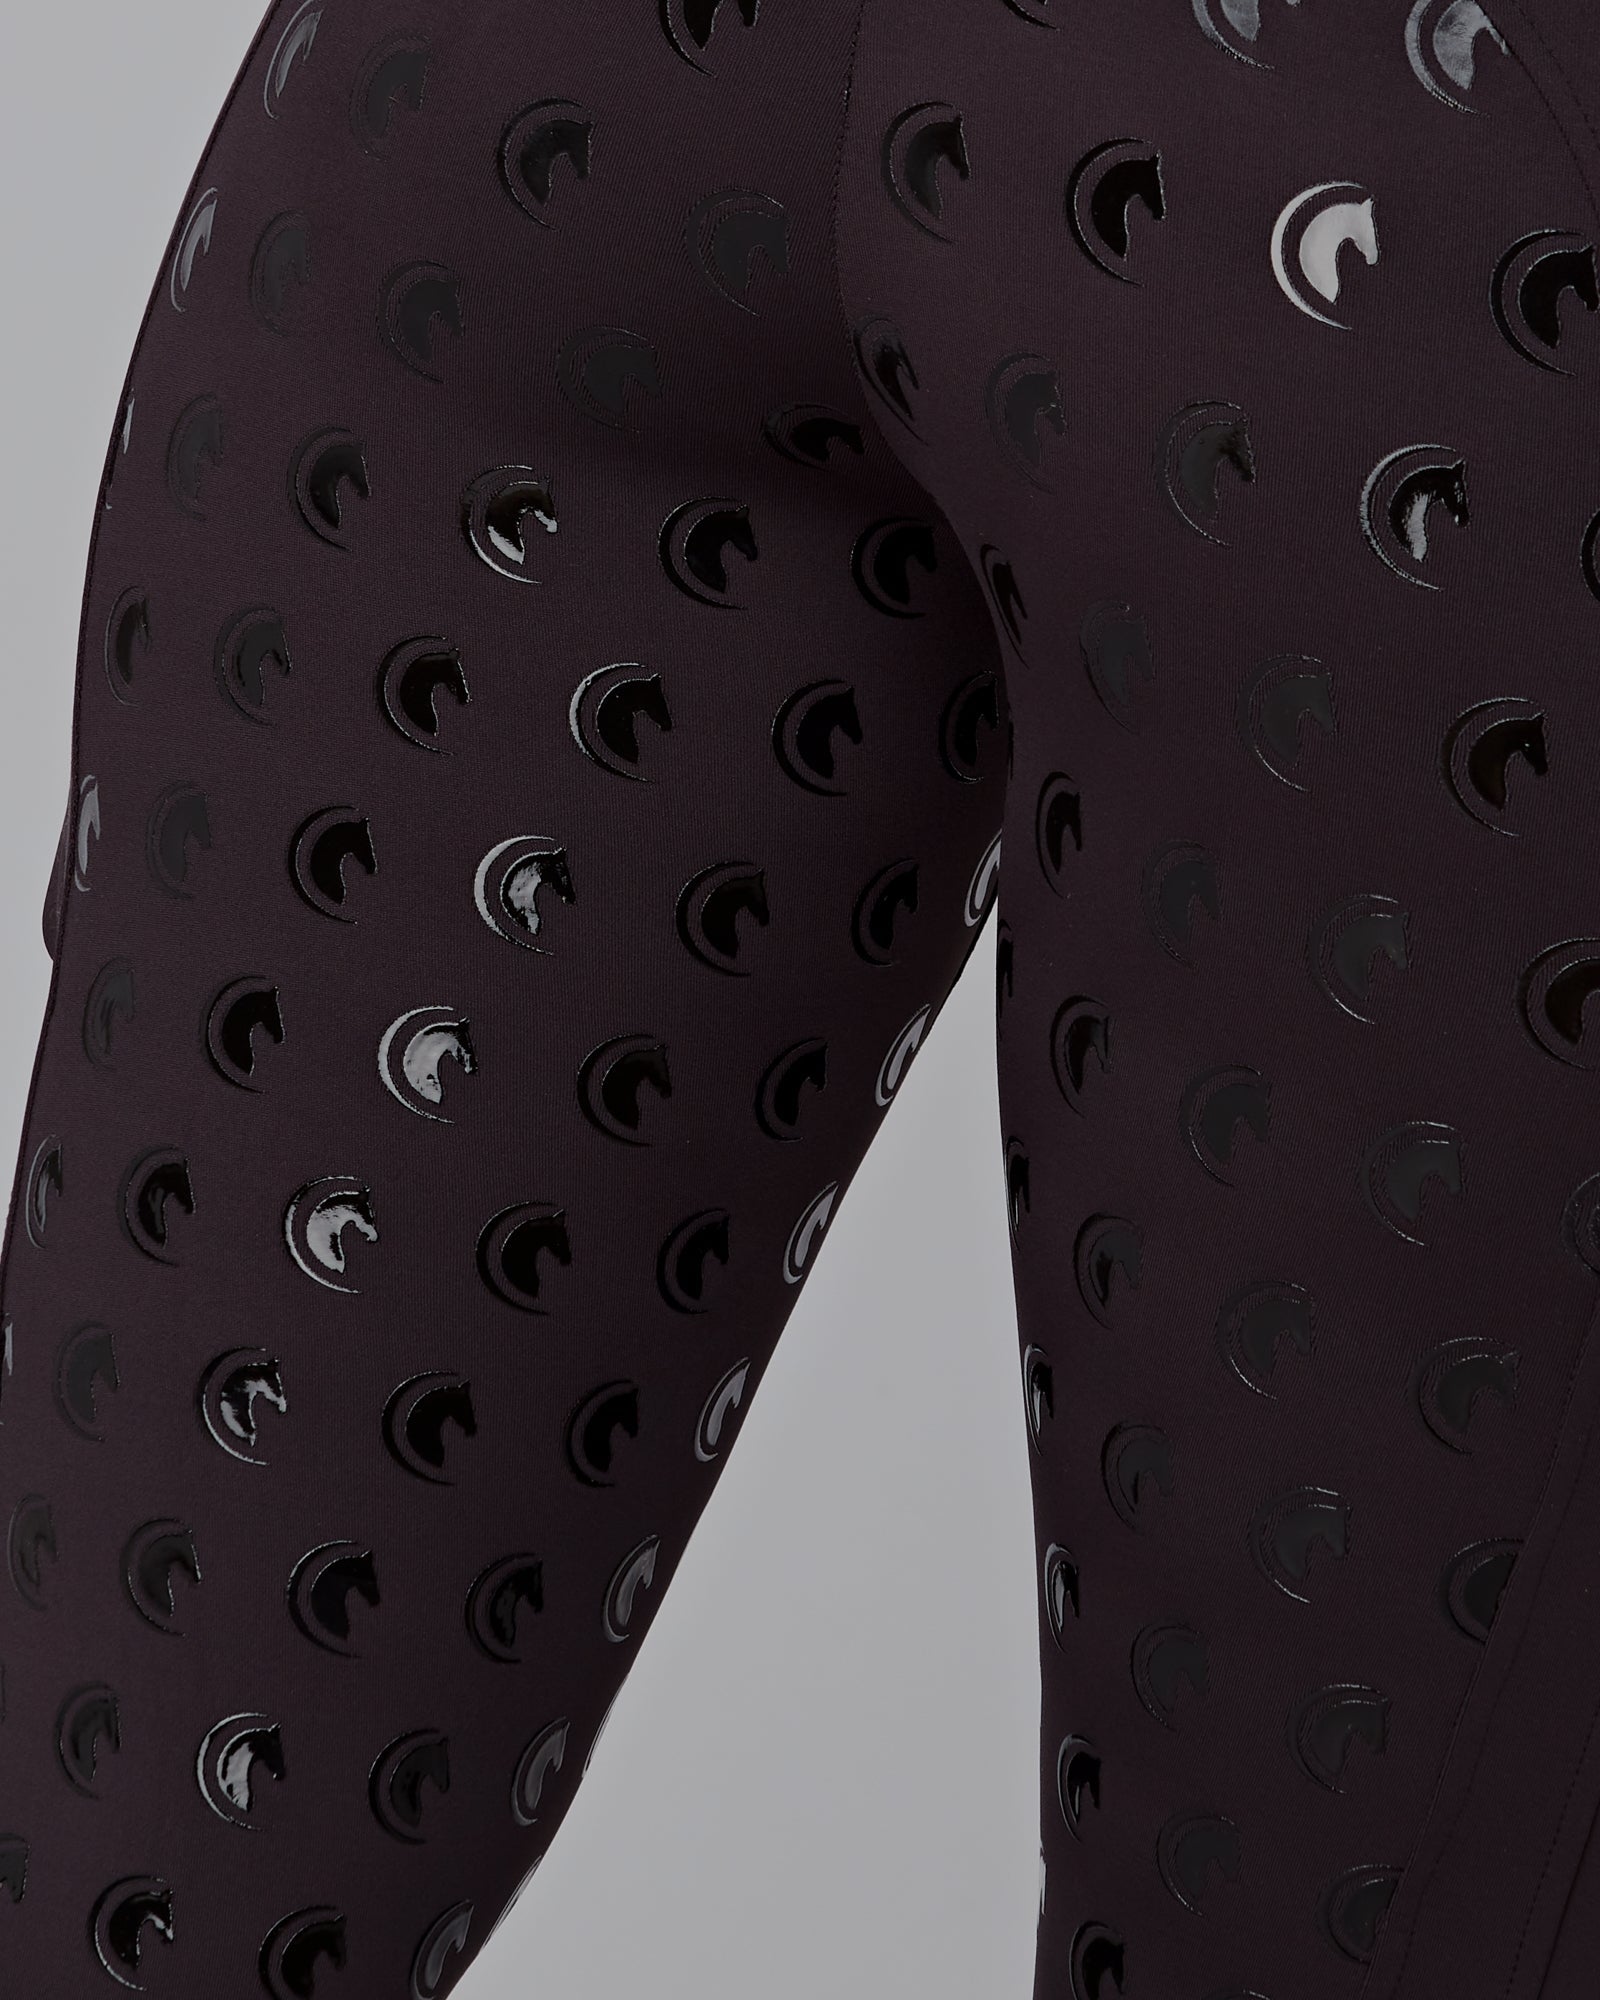 WINTER Thermal Rose Gold & Black Riding Leggings / Tights with Phone Pockets - WATER RESISTANT